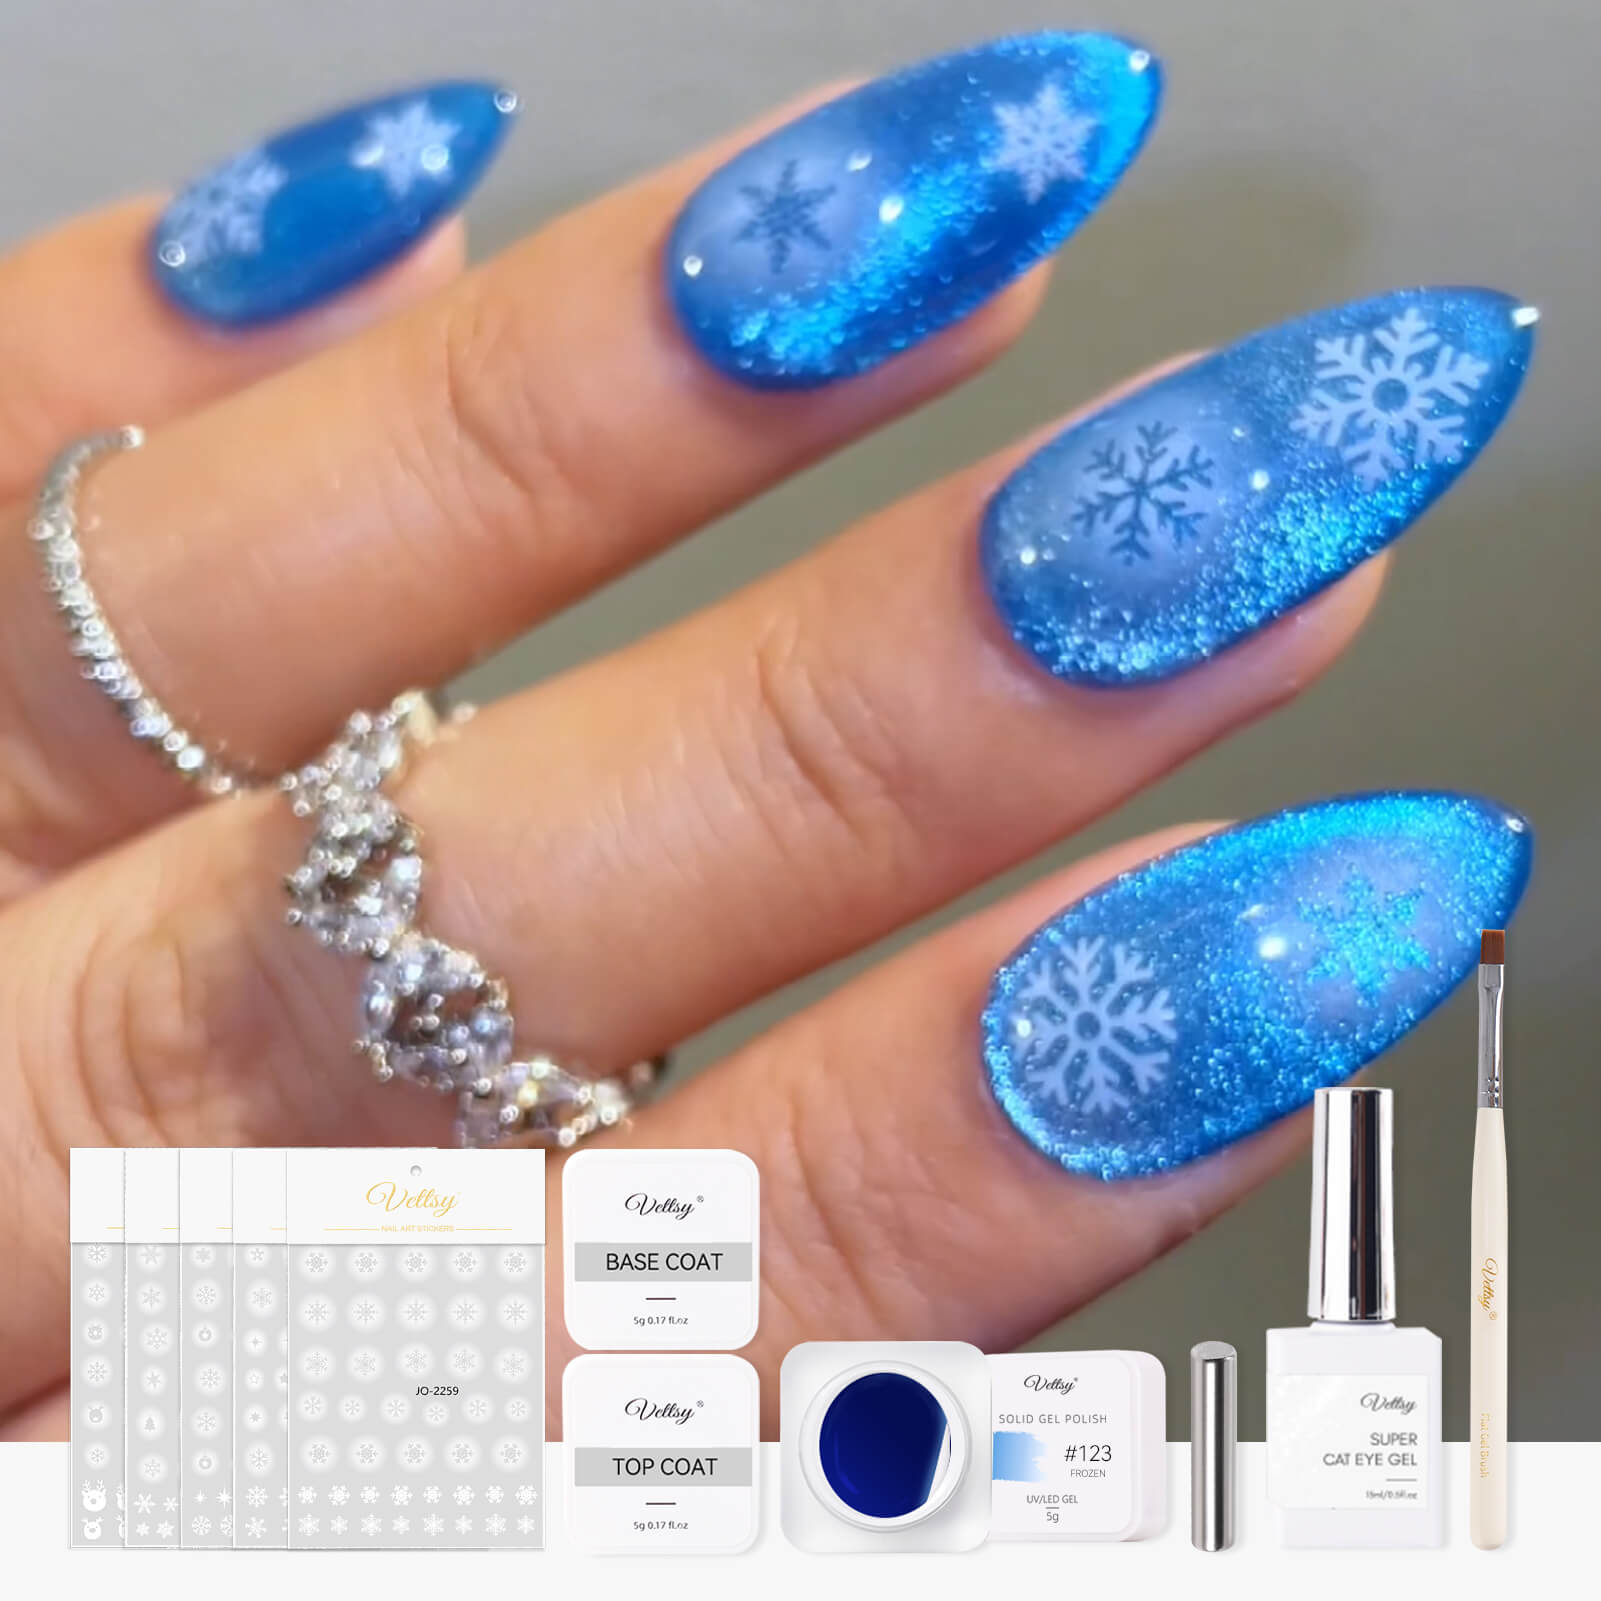 OM New Nail Art Kit Includes Design Glitter Beads Stamping Glue MakeUp  Cosmetic Set, box size- 16/10.5 - Price in India, Buy OM New Nail Art Kit  Includes Design Glitter Beads Stamping